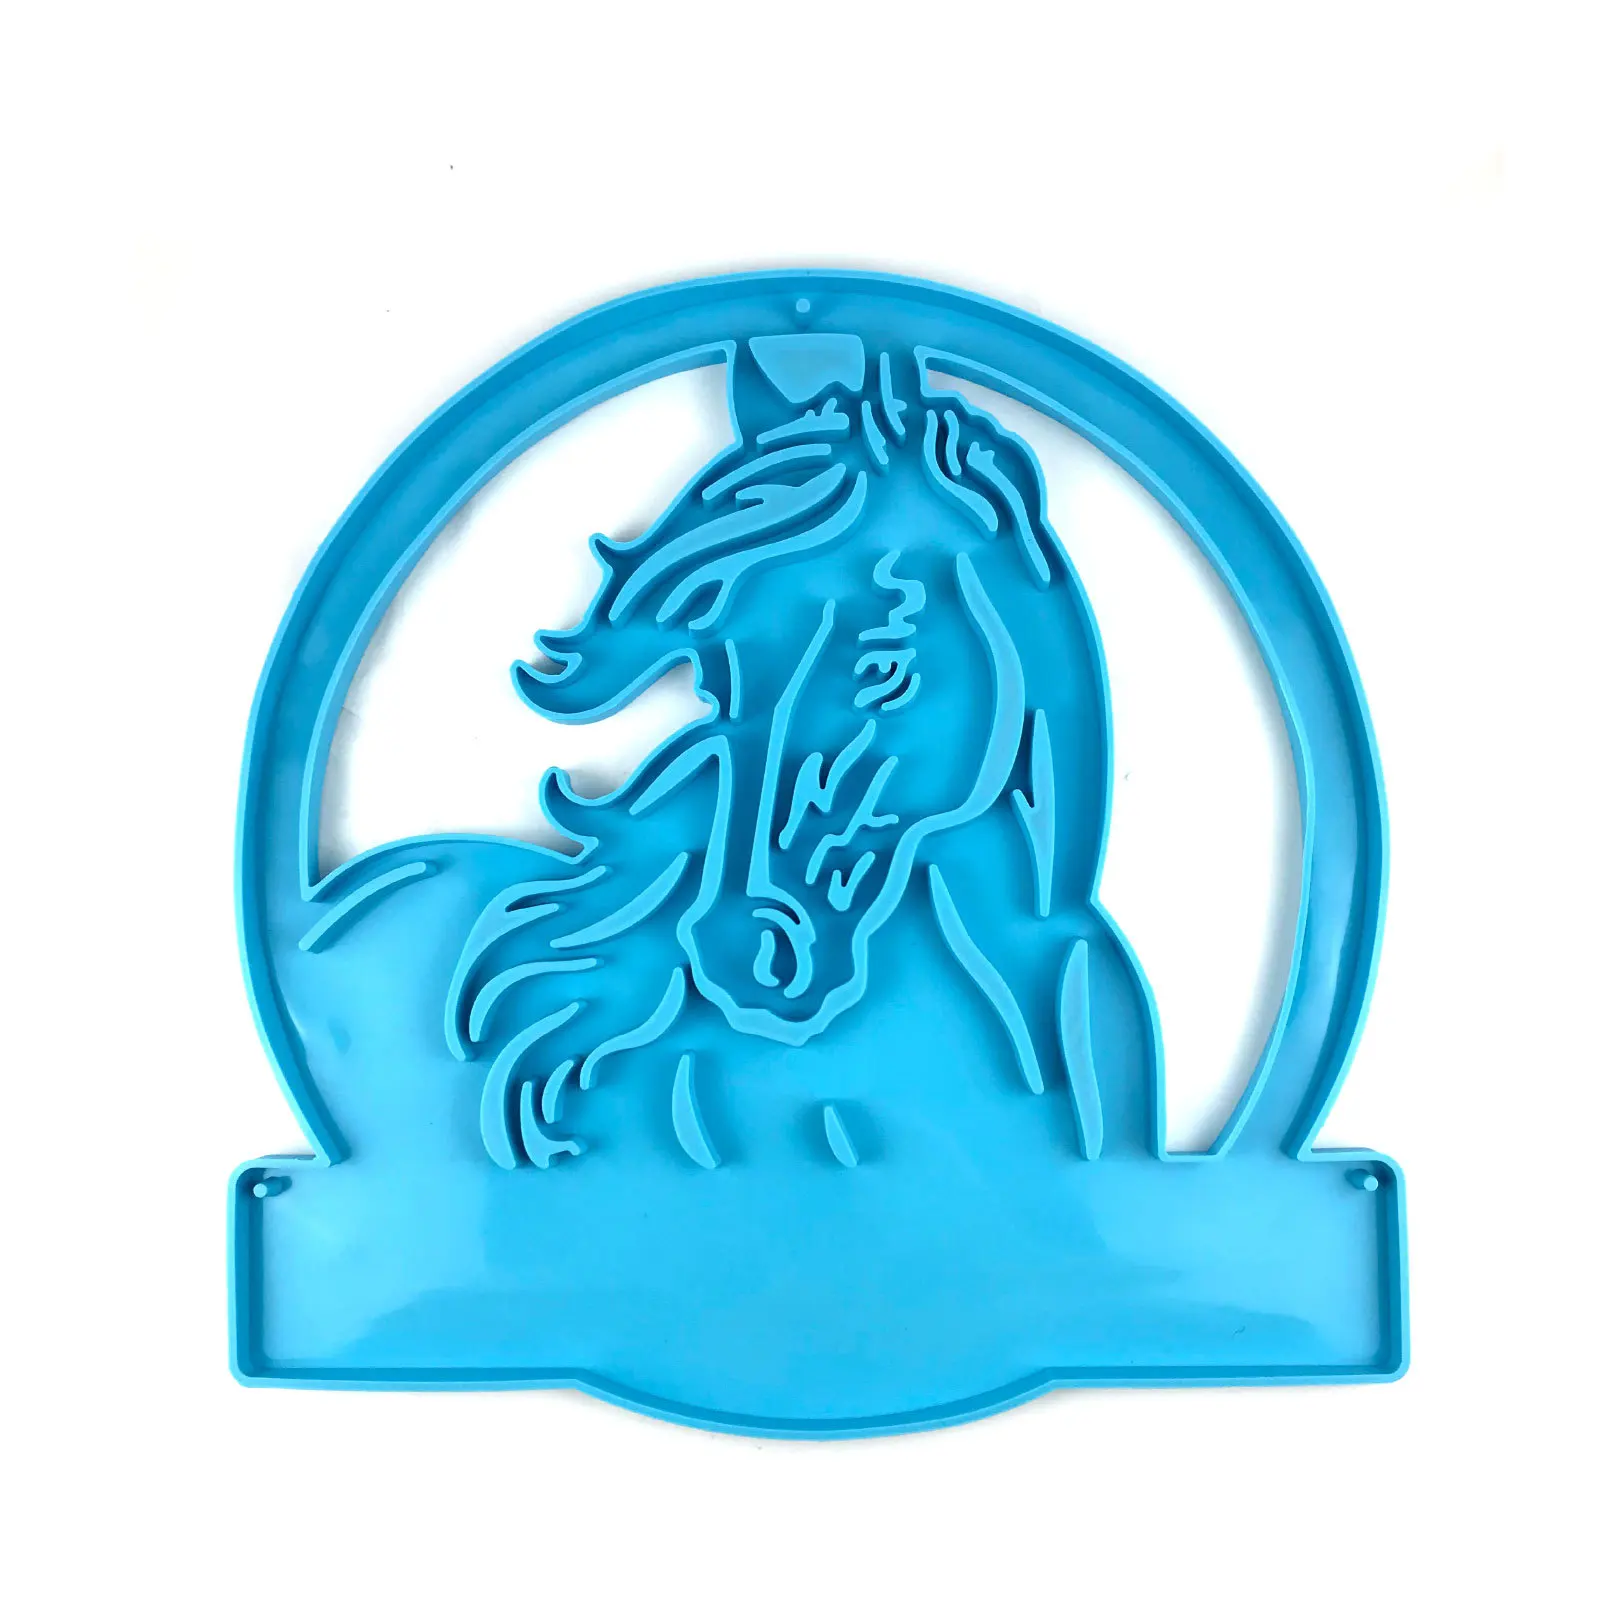 

W188 DIY amazon resin stable logo Epoxy mold horse stable decoration silicone mold, Blue